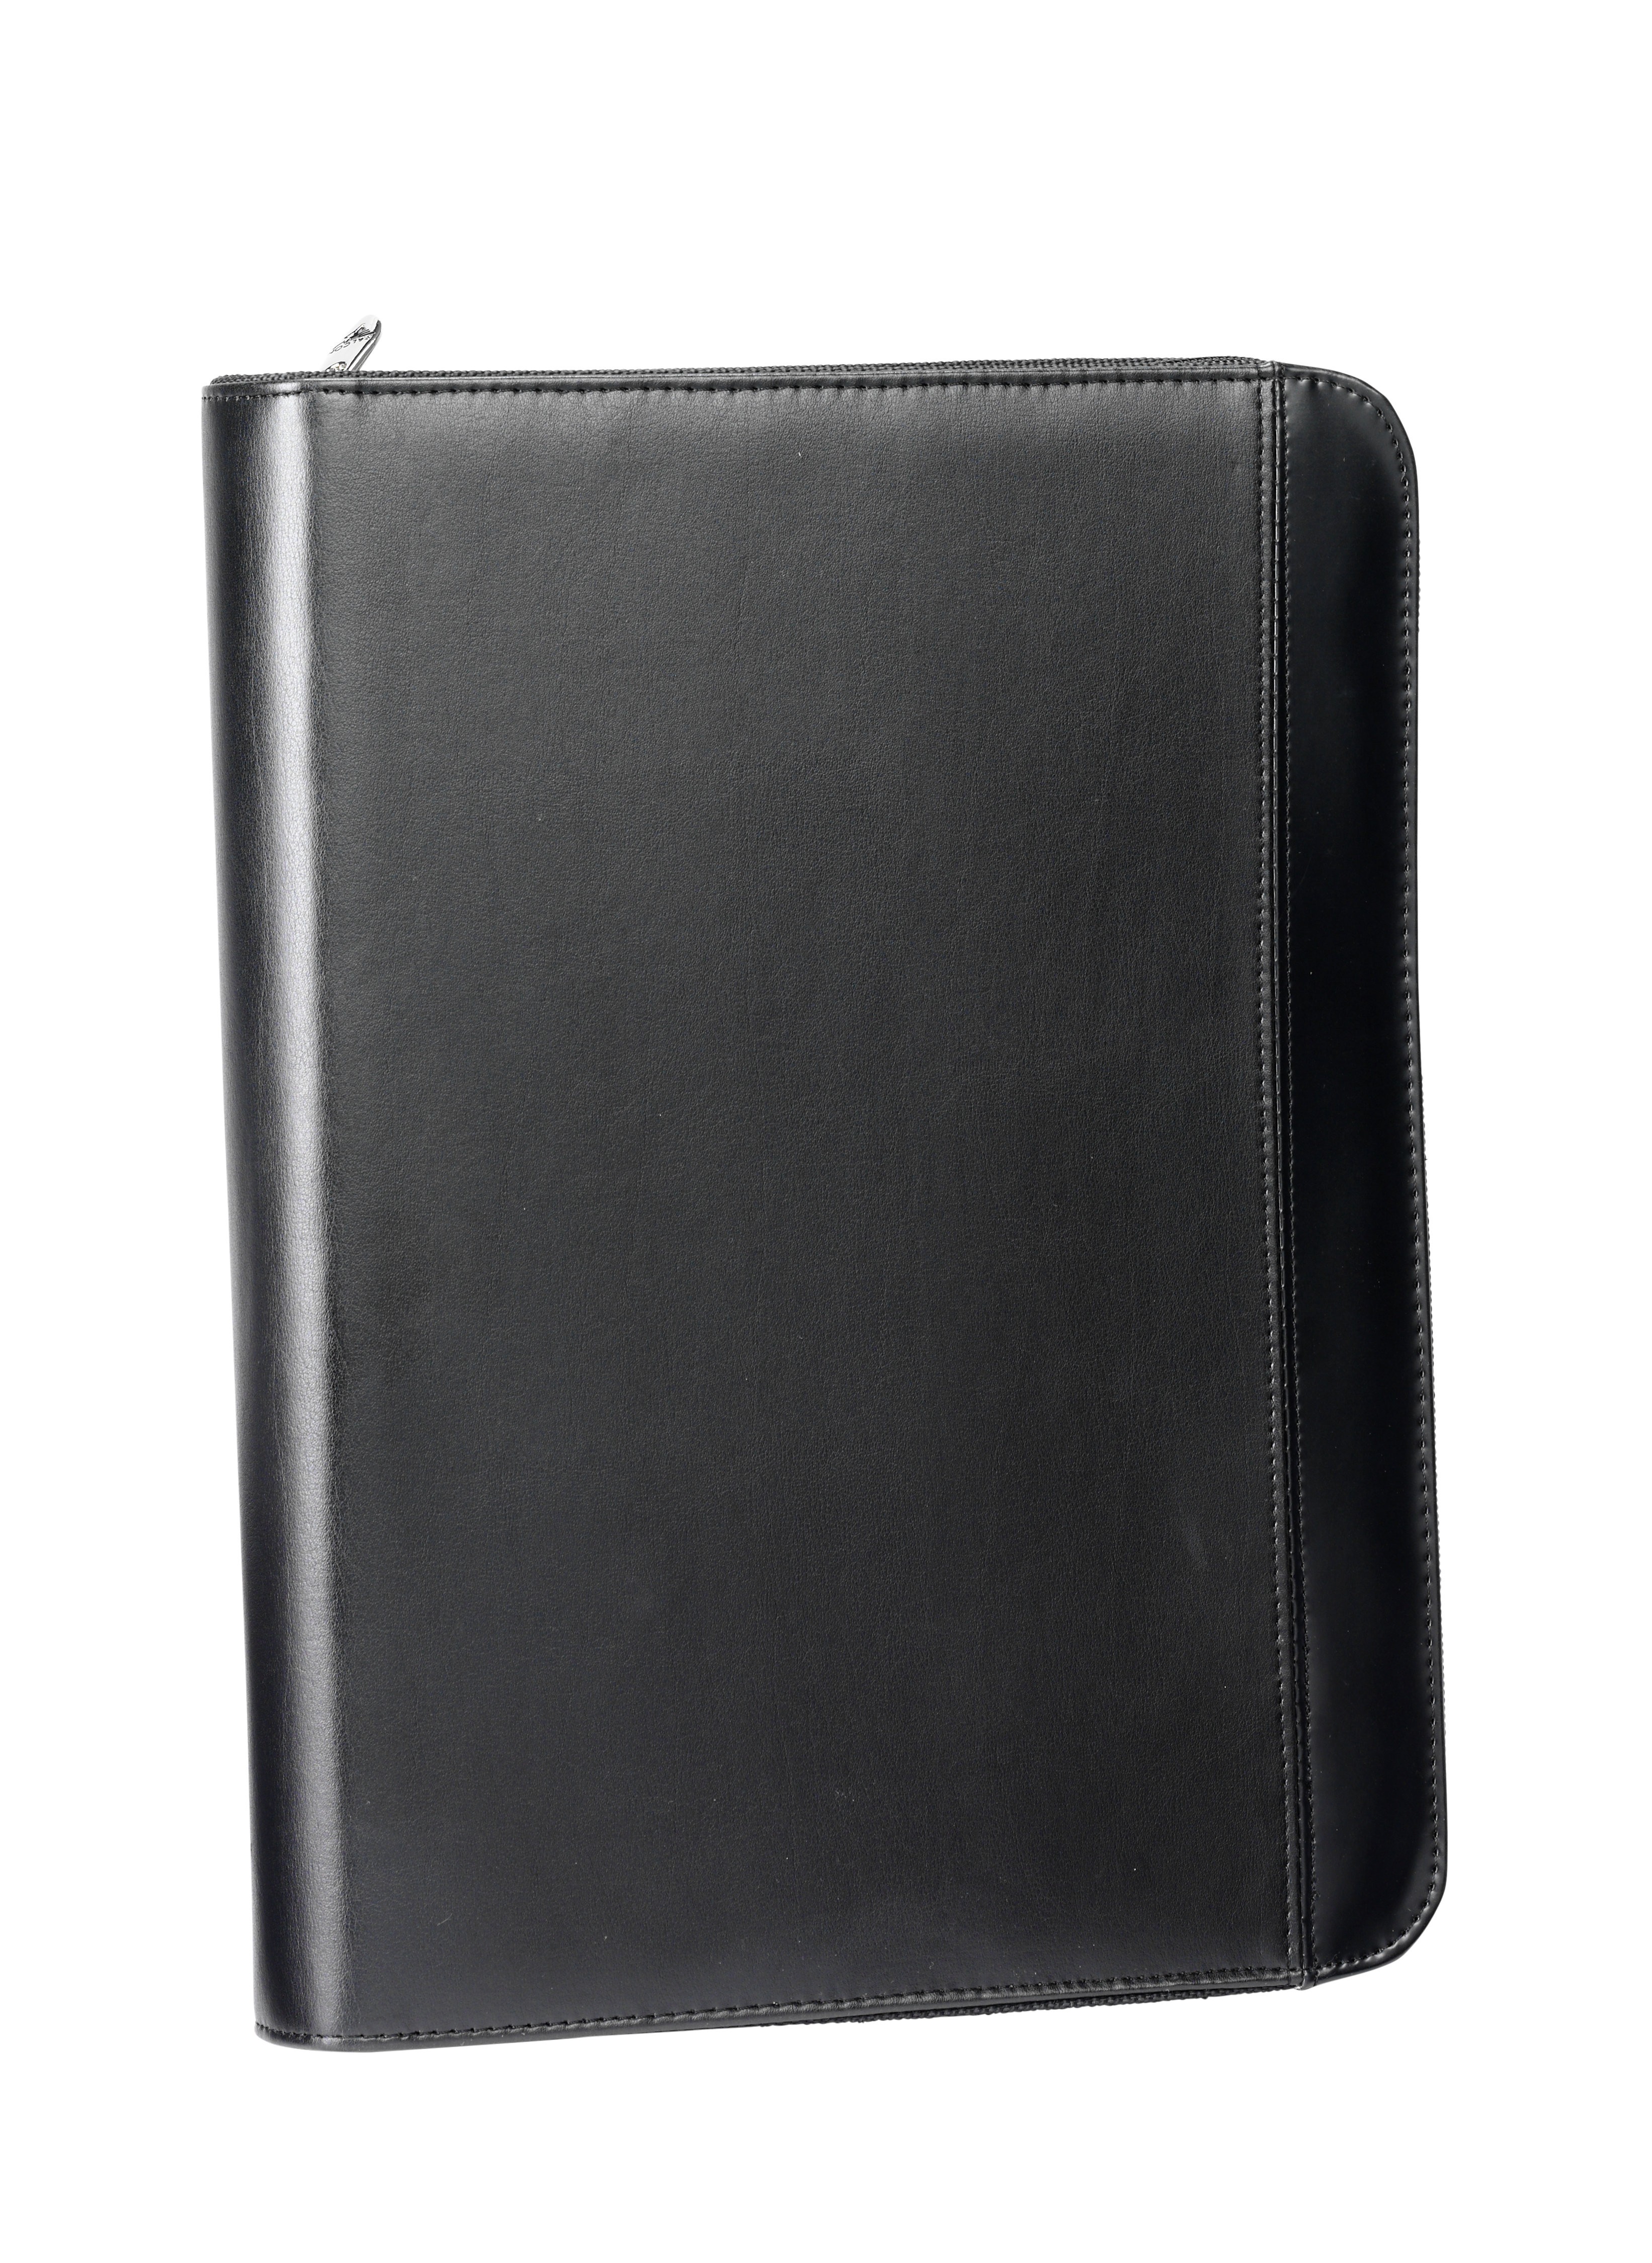 Falcon A4 iPad/Tablet Conference Folder Ring Binder With Calculator - FI6528 Black